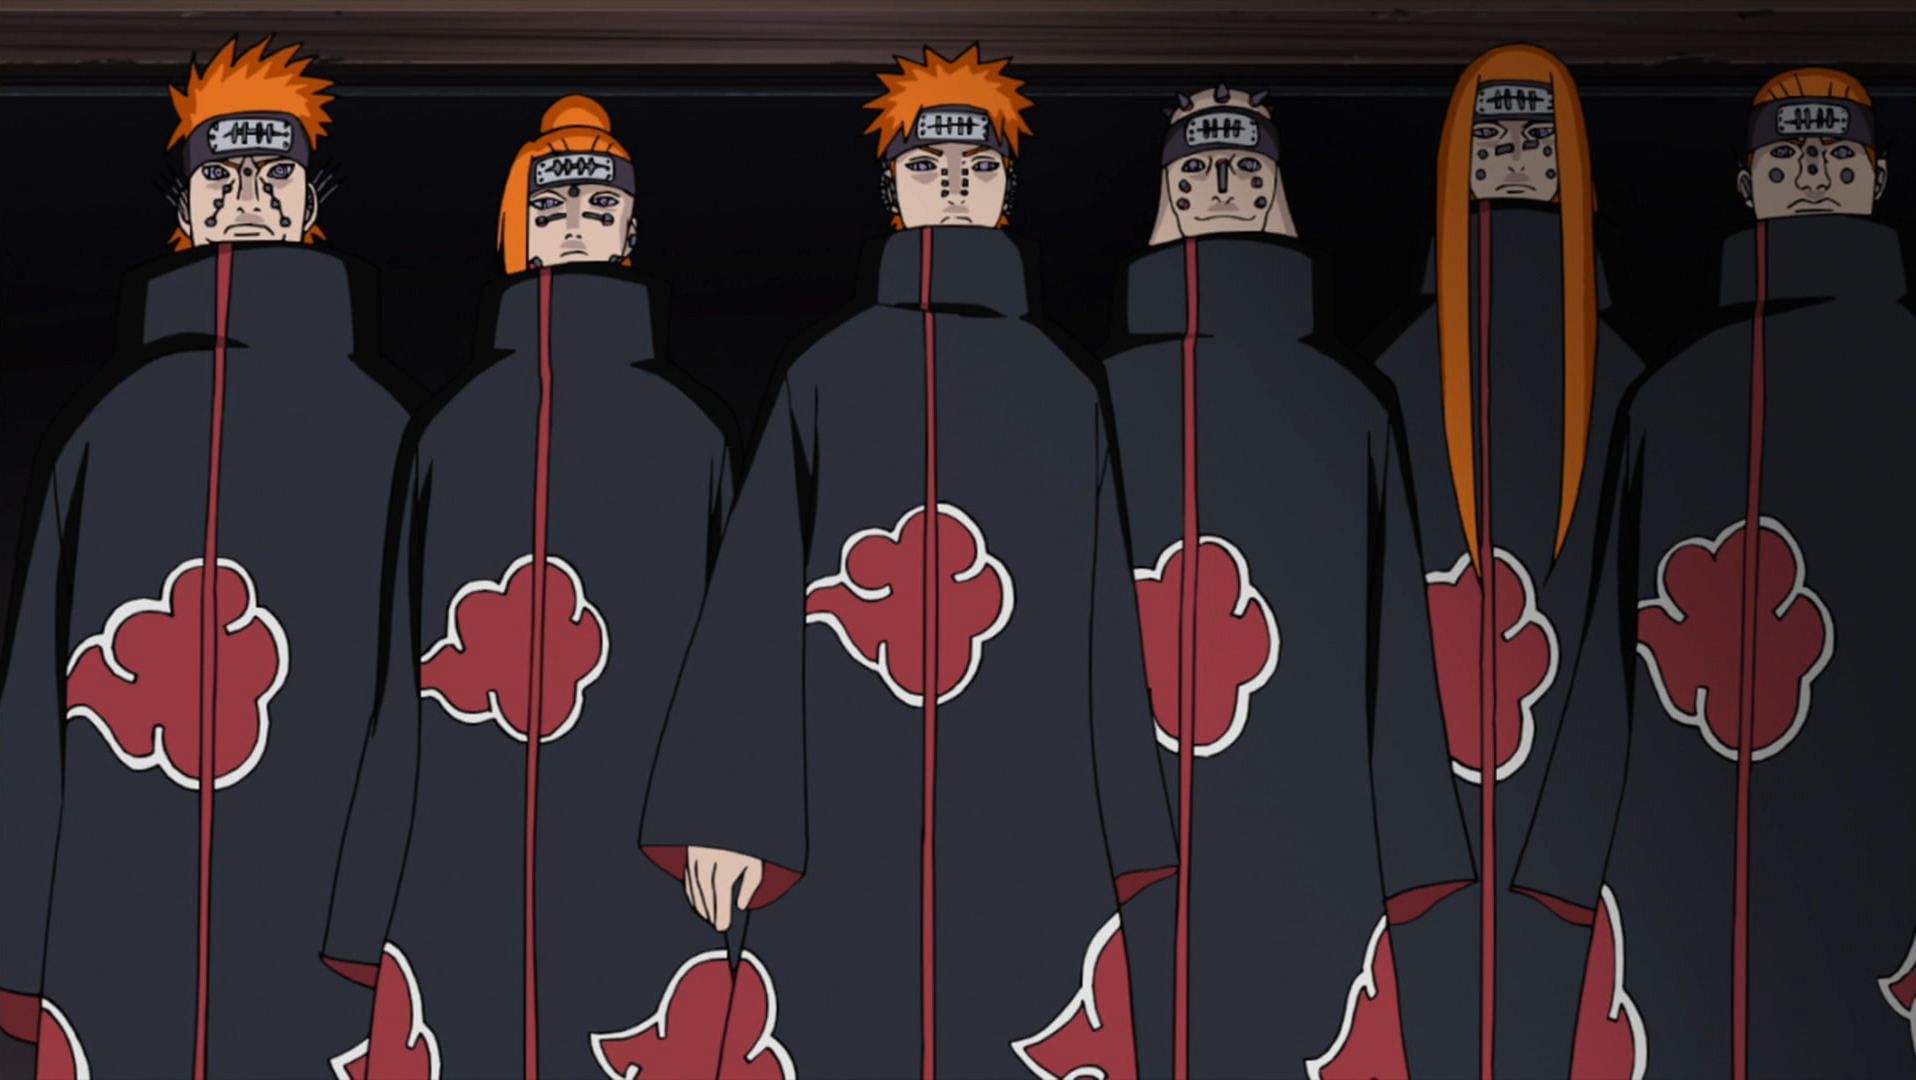 Via the Rinnegan, all six Paths of Pain seen here have a shared vision (Image via Studio Pierrot)